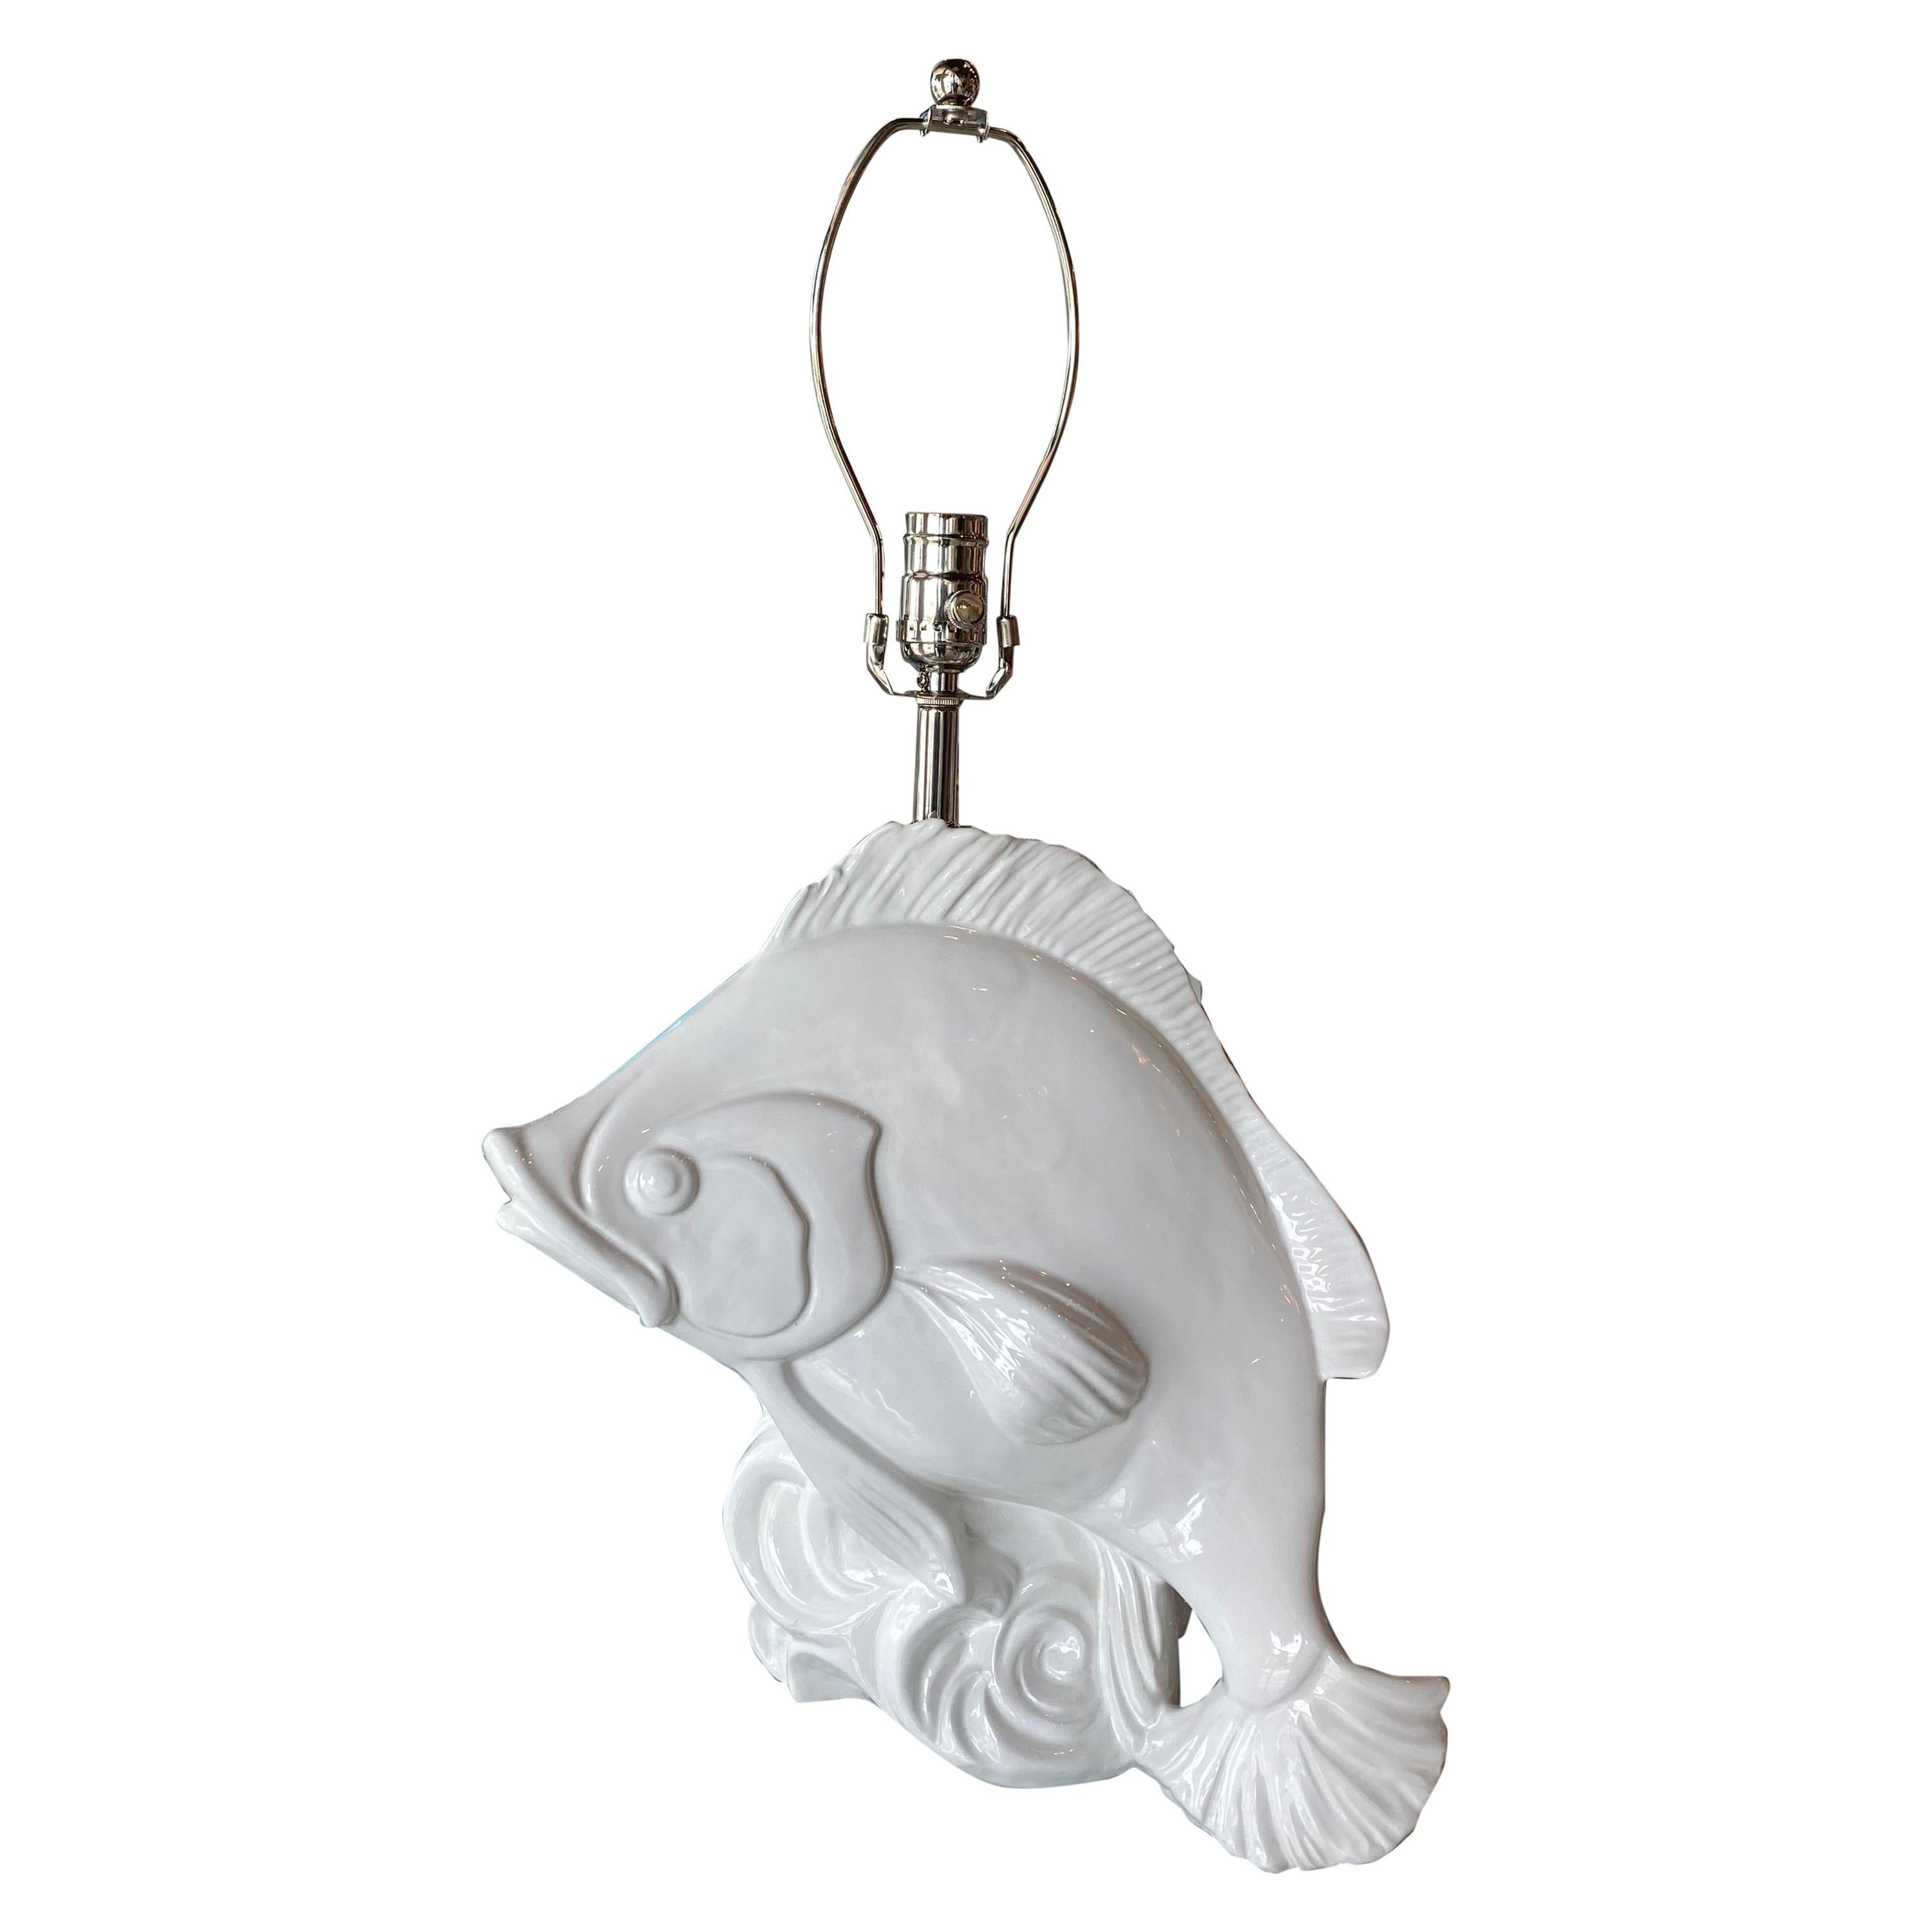 Lampe de table vintage en céramique blanche pour poissons tropicaux Made in Italy Newly Wired Chrome